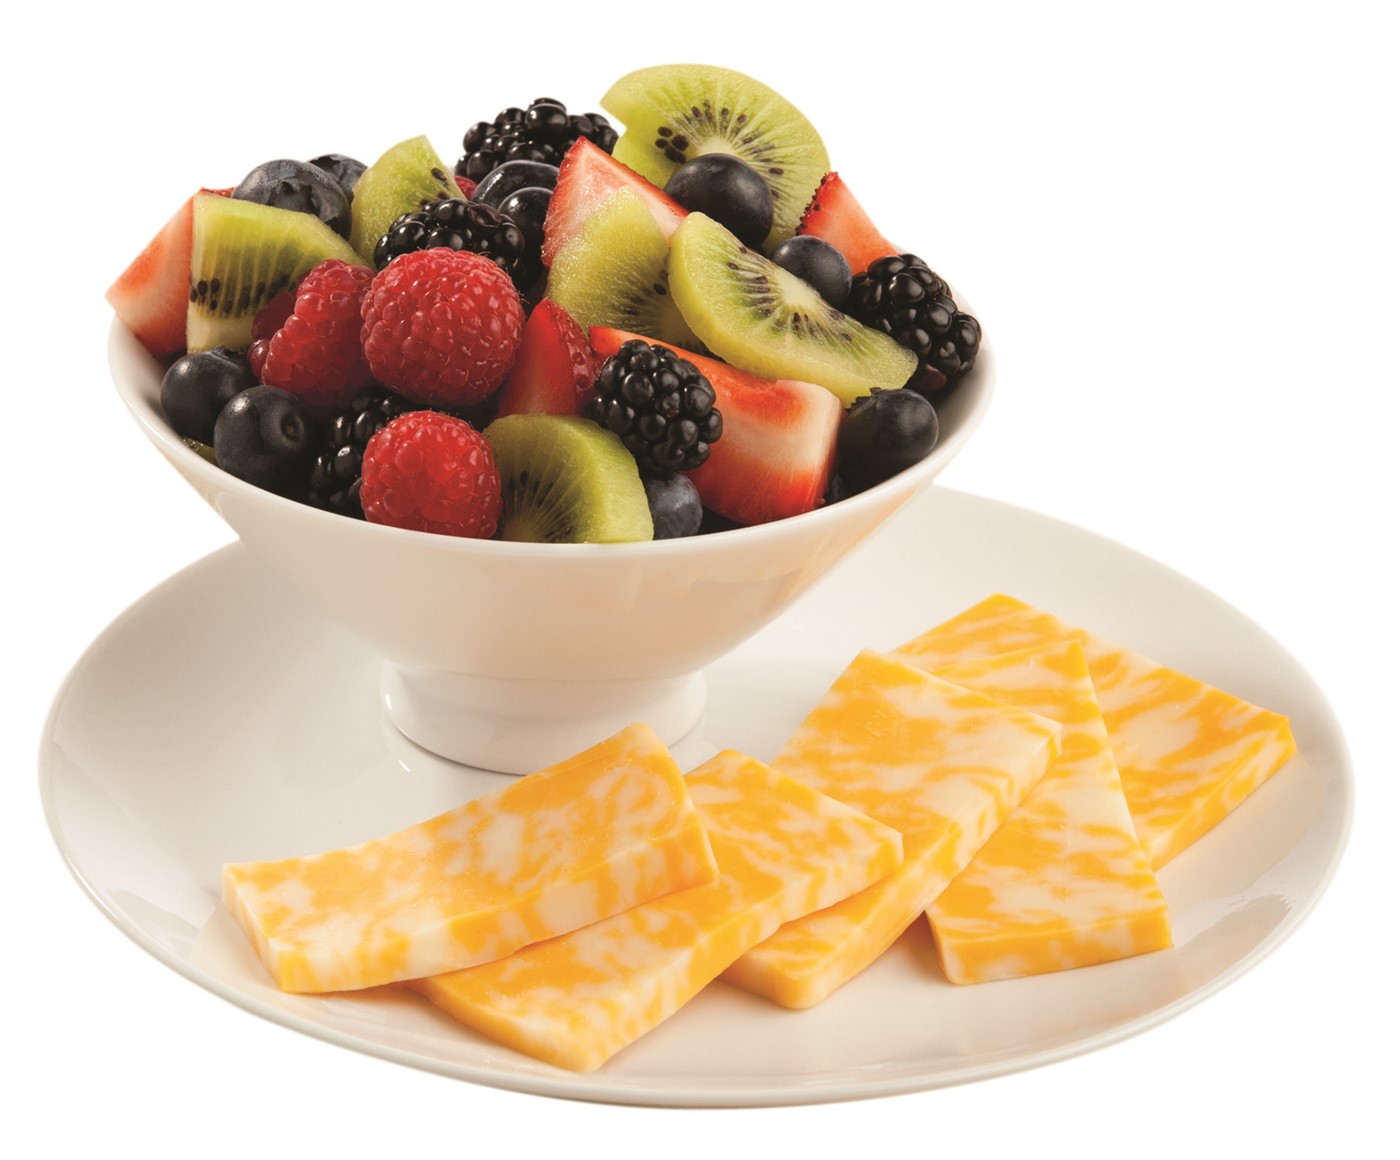 Colby Cheese Slices and a Bowl of Mixed Berries and Kiwi